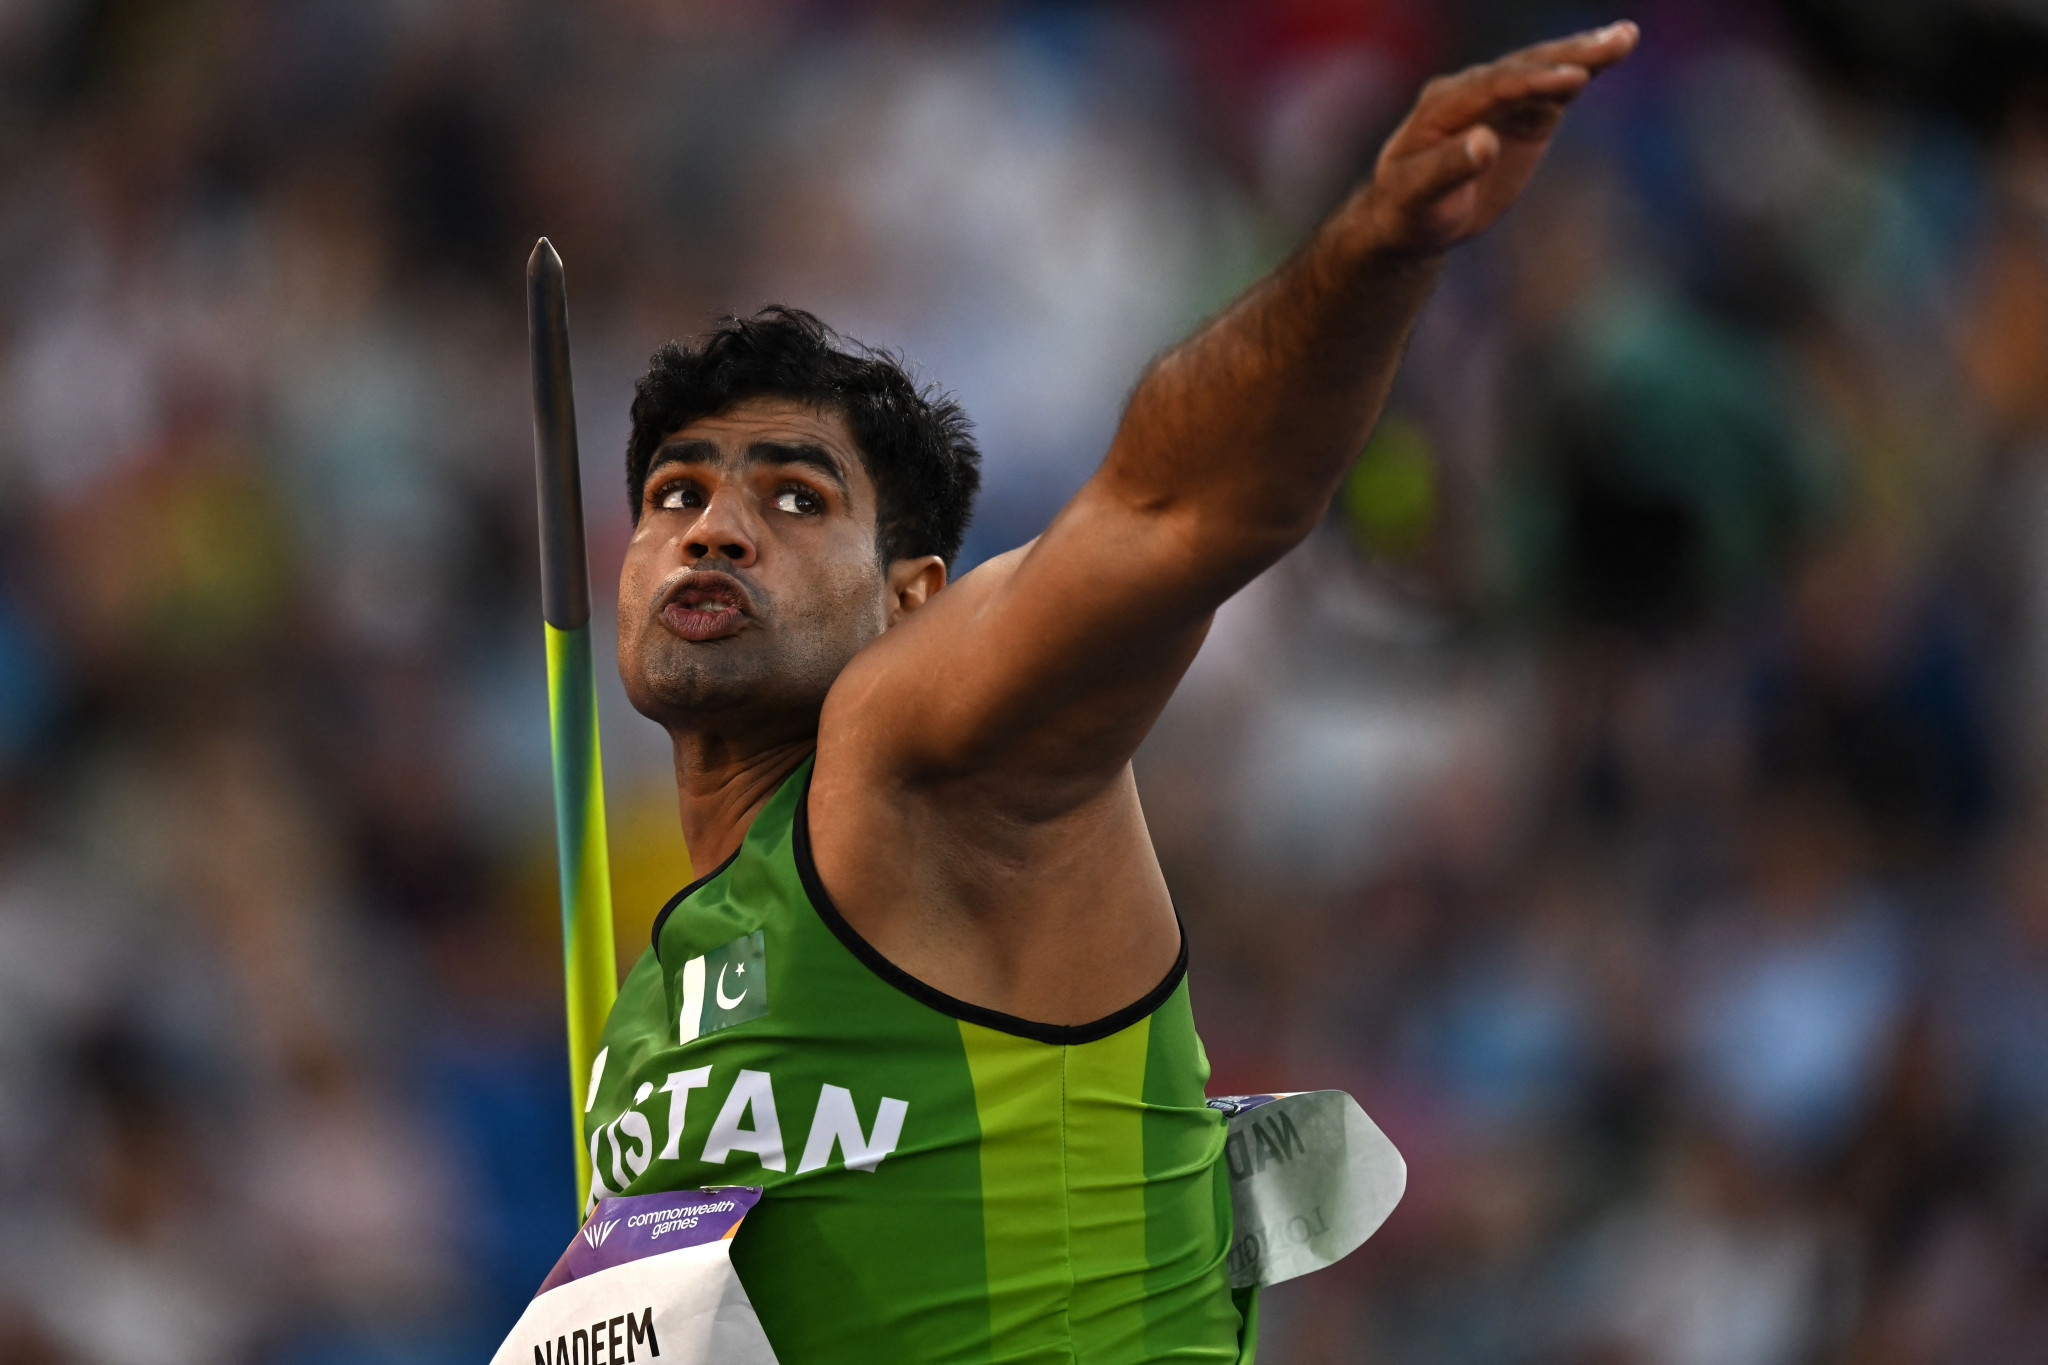 Pakistan's Arshad Nadeem set a javelin Games record of 90.18 metres with a remarkable fifth-round throw to clinch gold at the Alexander Stadium ©Getty Images